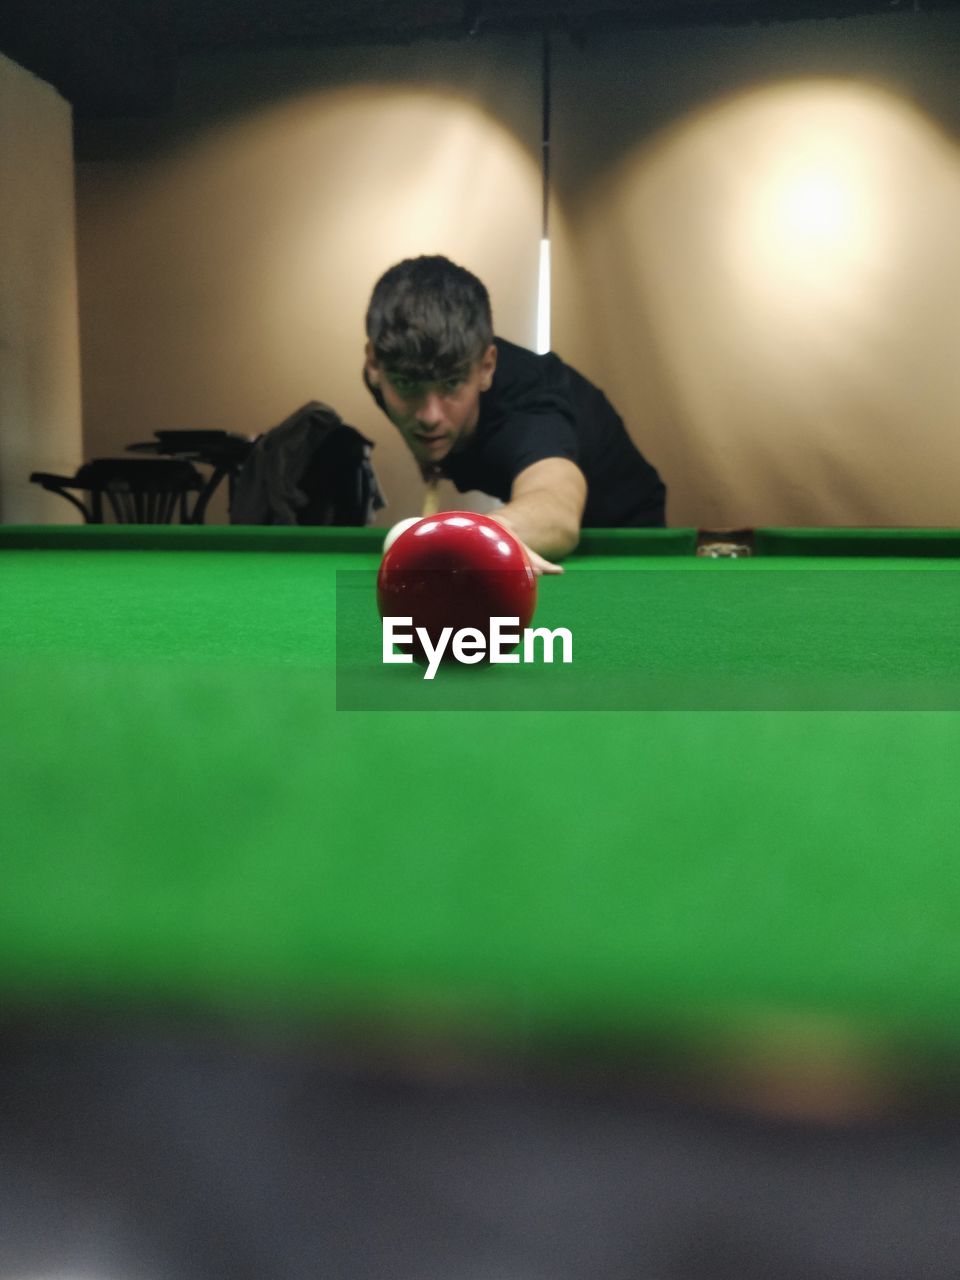 billiards, sports, ball, pool ball, pool table, pool sport, snooker, indoor games and sports, game, leisure activity, table, adult, billiard room, billiard table, pool cue, green, one person, billiard ball, recreation, cue stick, indoors, men, concentration, relaxation, individual sports, aiming, sports equipment, pool hall, lifestyles, young adult, eight-ball, nine-ball, leisure games, sphere, skill, recreation room